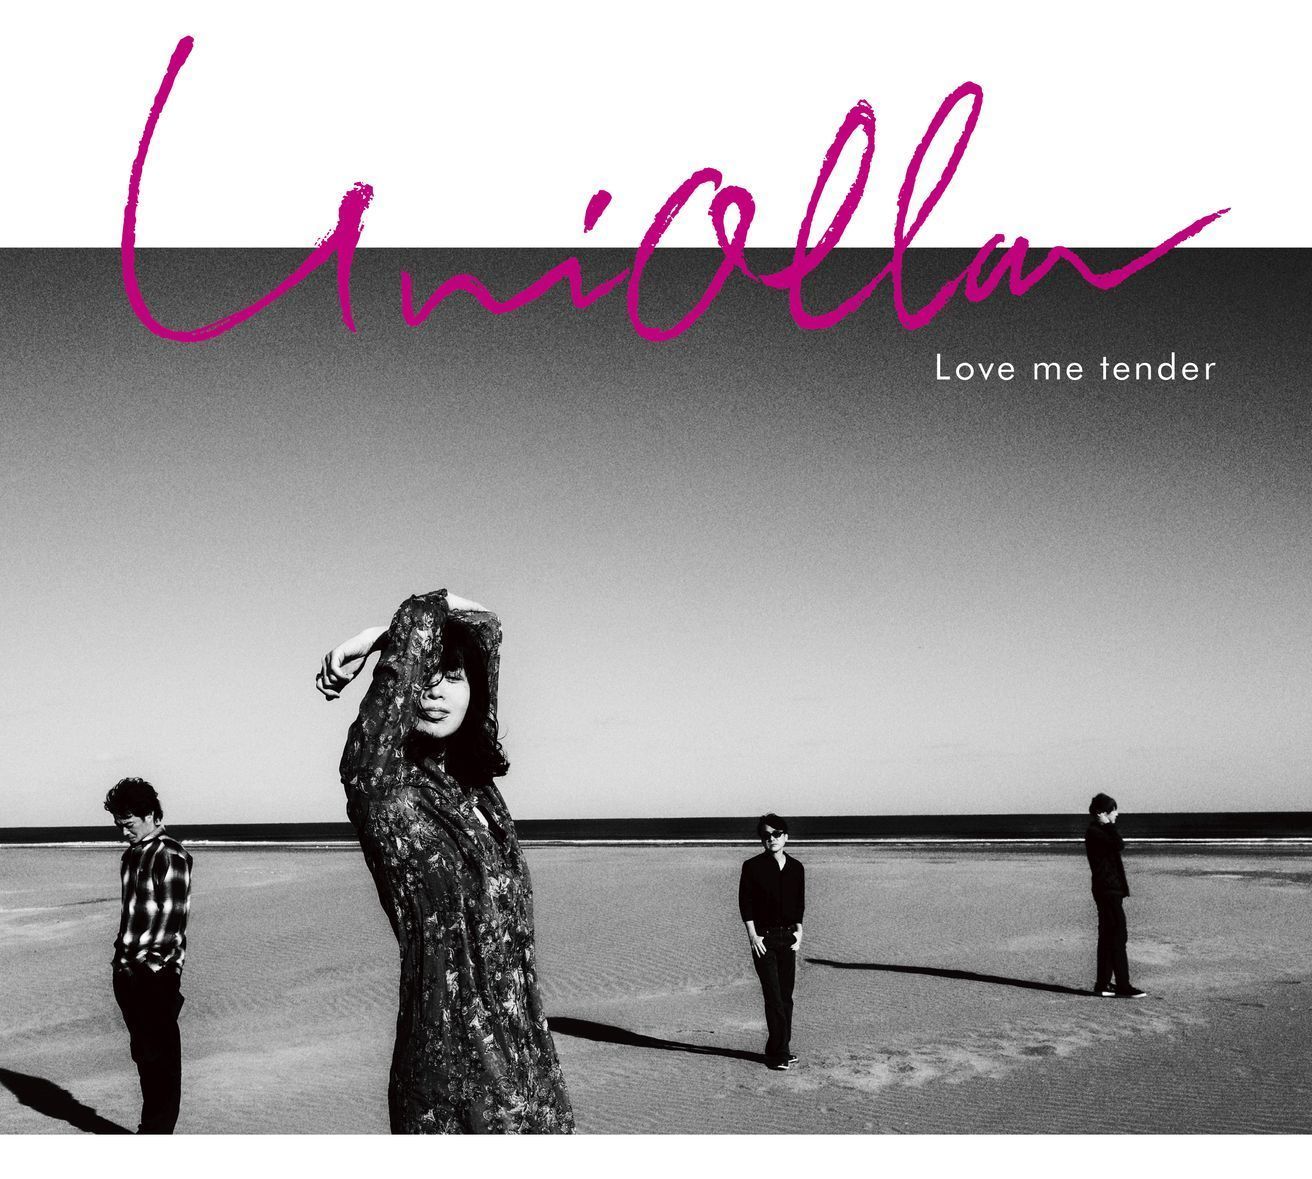 Uniolla】7月5日アルバム『Love me tender』リリース！5月24日リード曲を先行配信！ | LOVE PSYCHEDELICO  OFFICIAL SITE